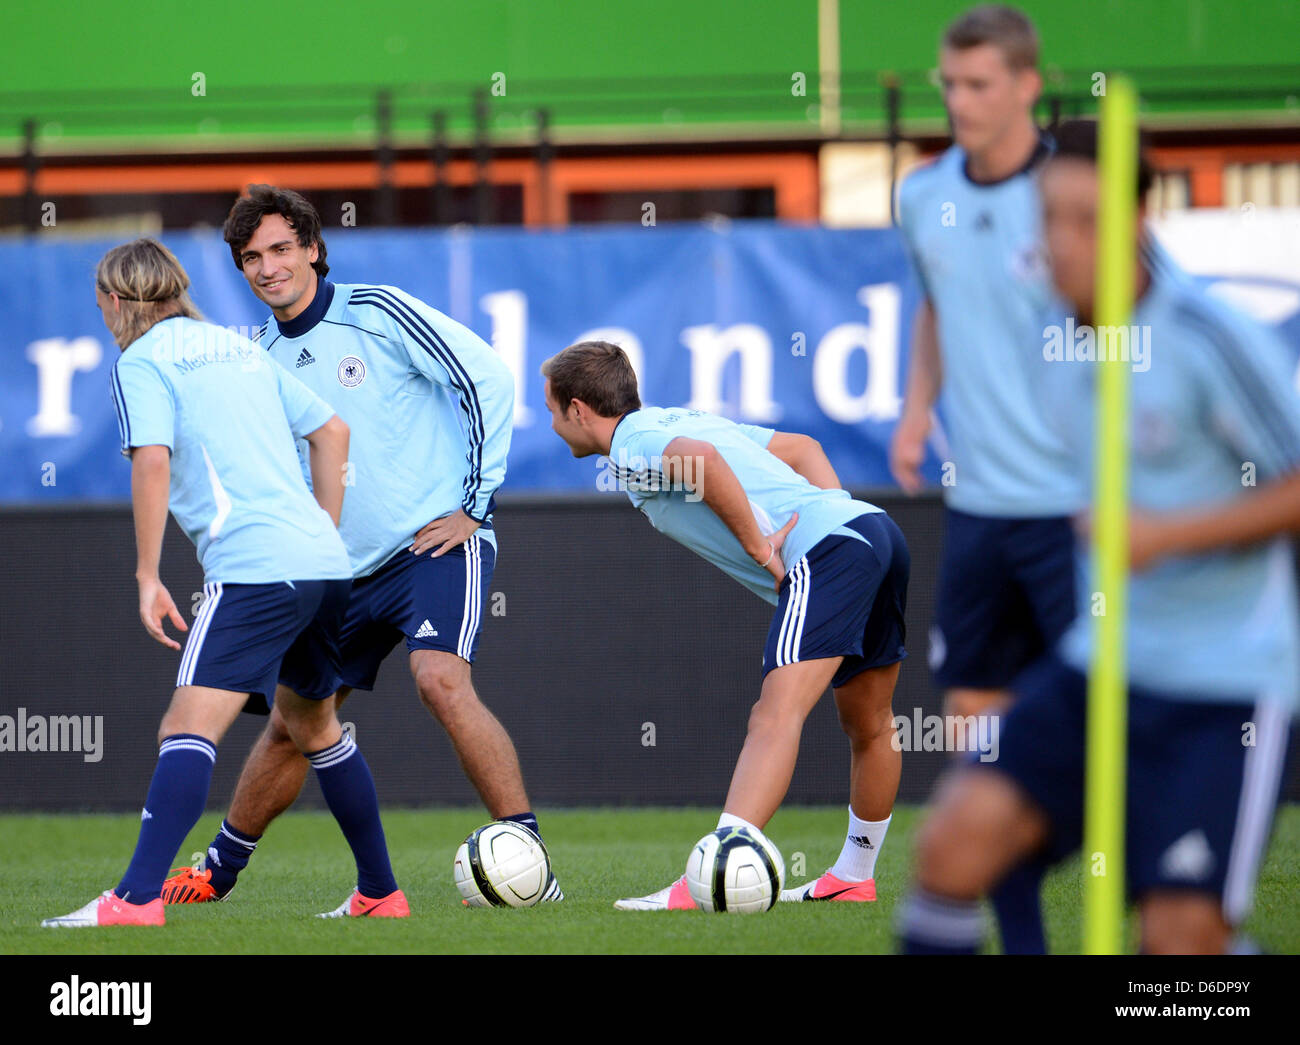 Germany's Marcel Schmelzer (L-3-R), Mats Hummels and Mario Goetze stretch and talk during a practice session of the national soccer team at Ernst Happel Stadium in Vienna, Austria, 10 September 2012. The German national soccer team prepares for its upcoming FIFA World Cup 2014 qualification match against Austria on 11 September. Photo: Peter Steffen Stock Photo